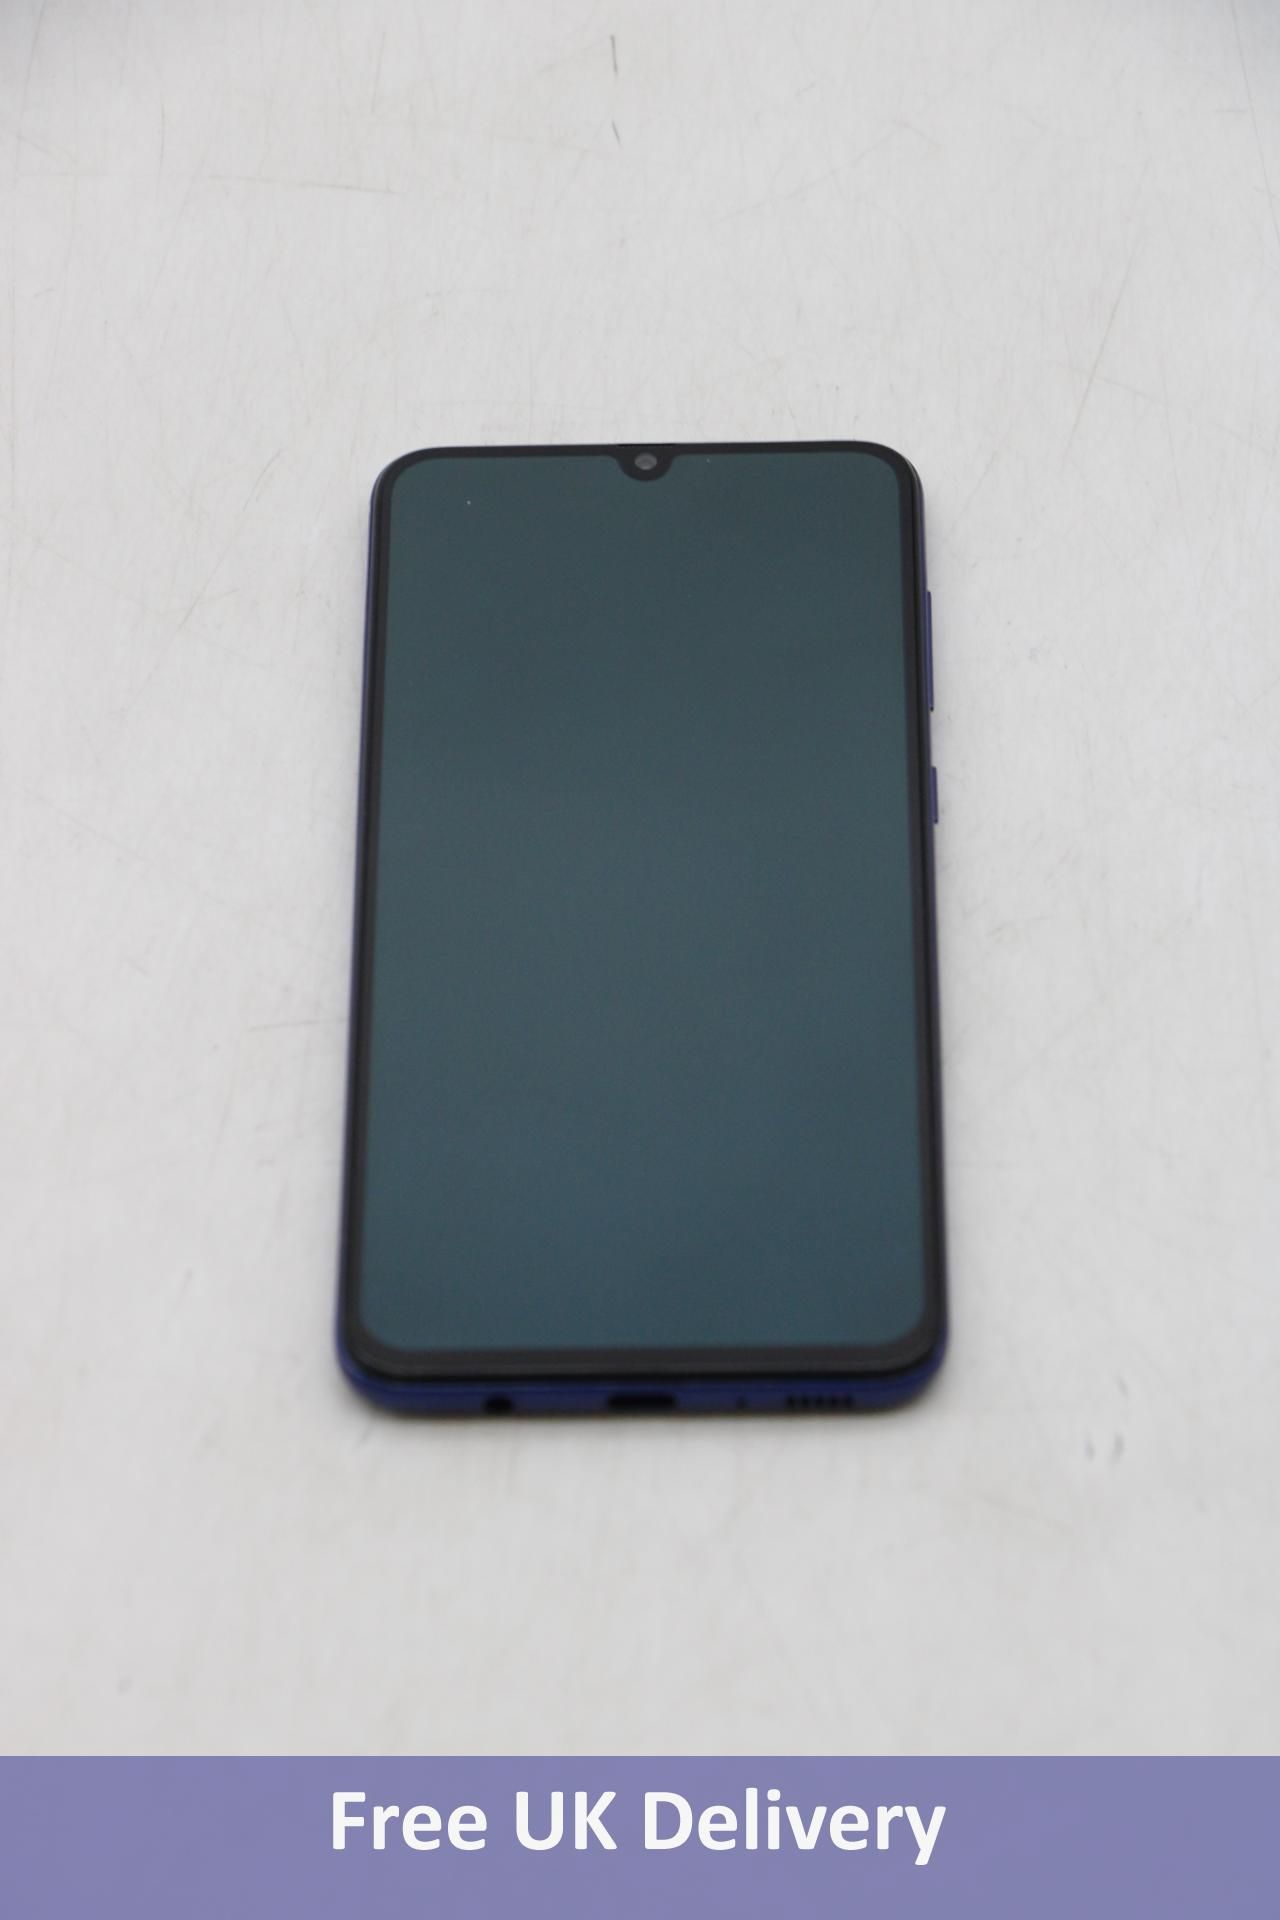 Samsung Galaxy A70 Android Mobile Phone, SM-A705FN/DS 6GB, 128GB, Blue. Used, No box or accessories,